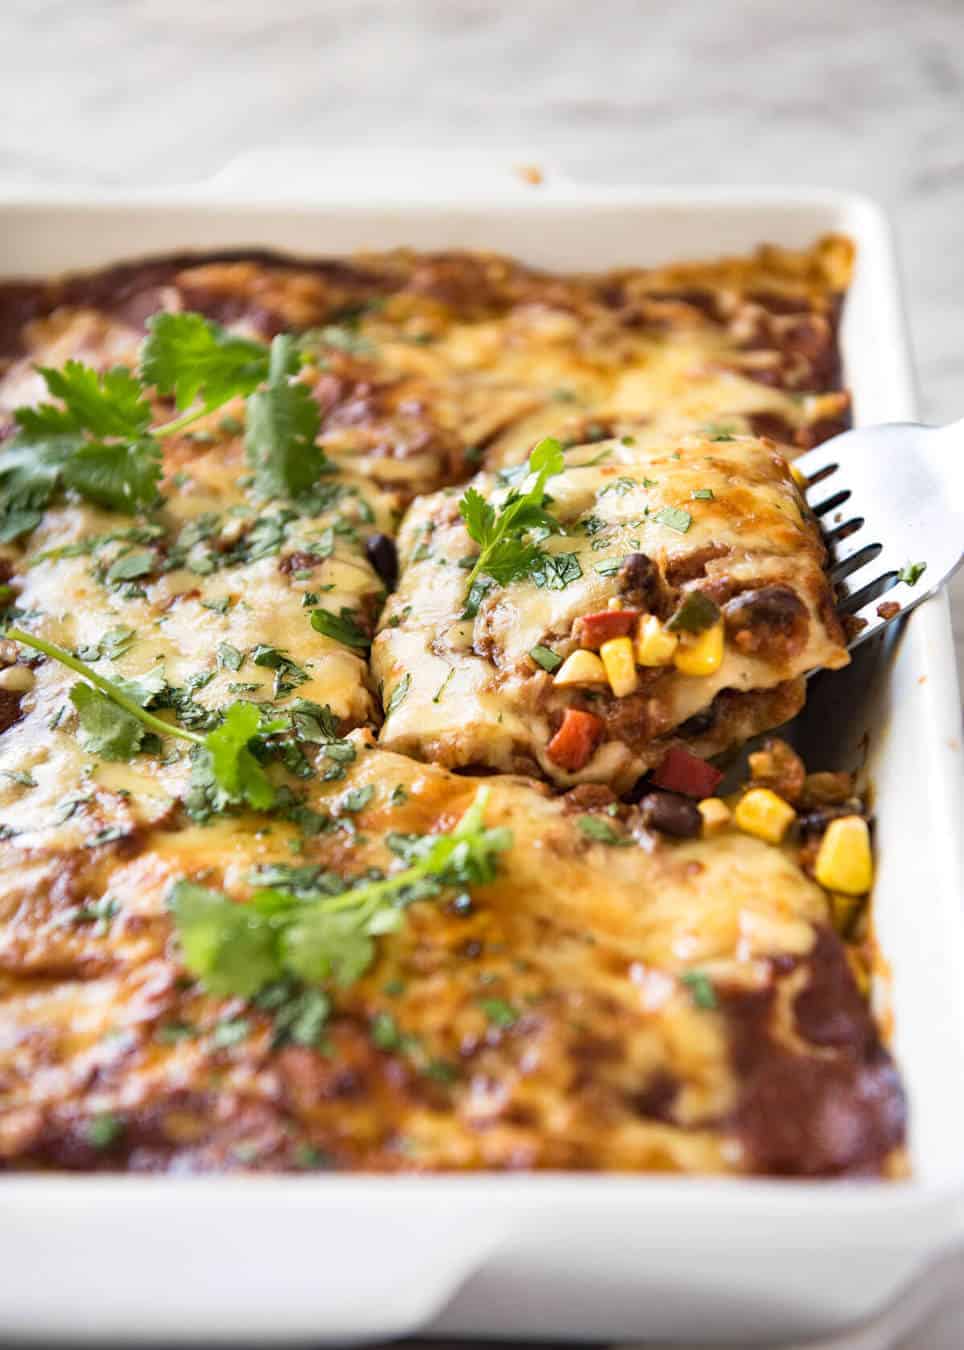 Vegetarian Mexican Caserole (Lasagna) - Fresh, healthy and loaded with Mexican flavours, just 342 calories per serving! recipetineats.com